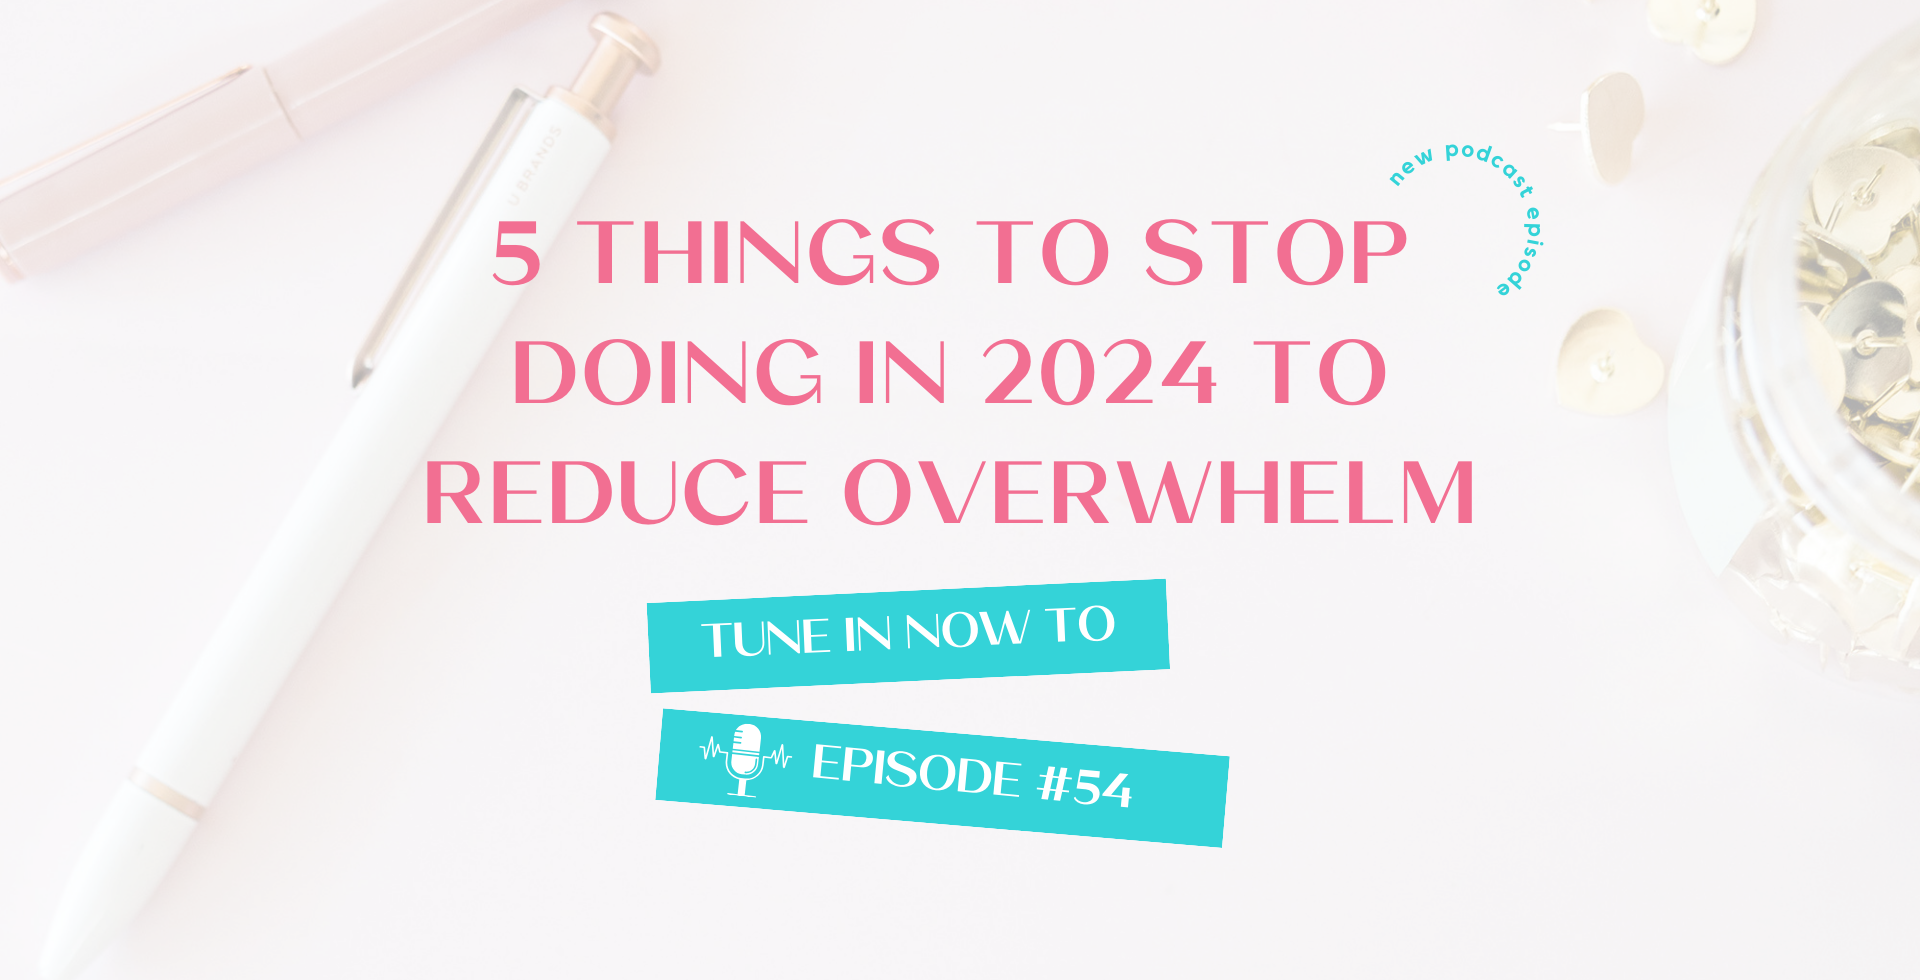 5 Things to Stop Doing in 2024 to Reduce Overwhelm